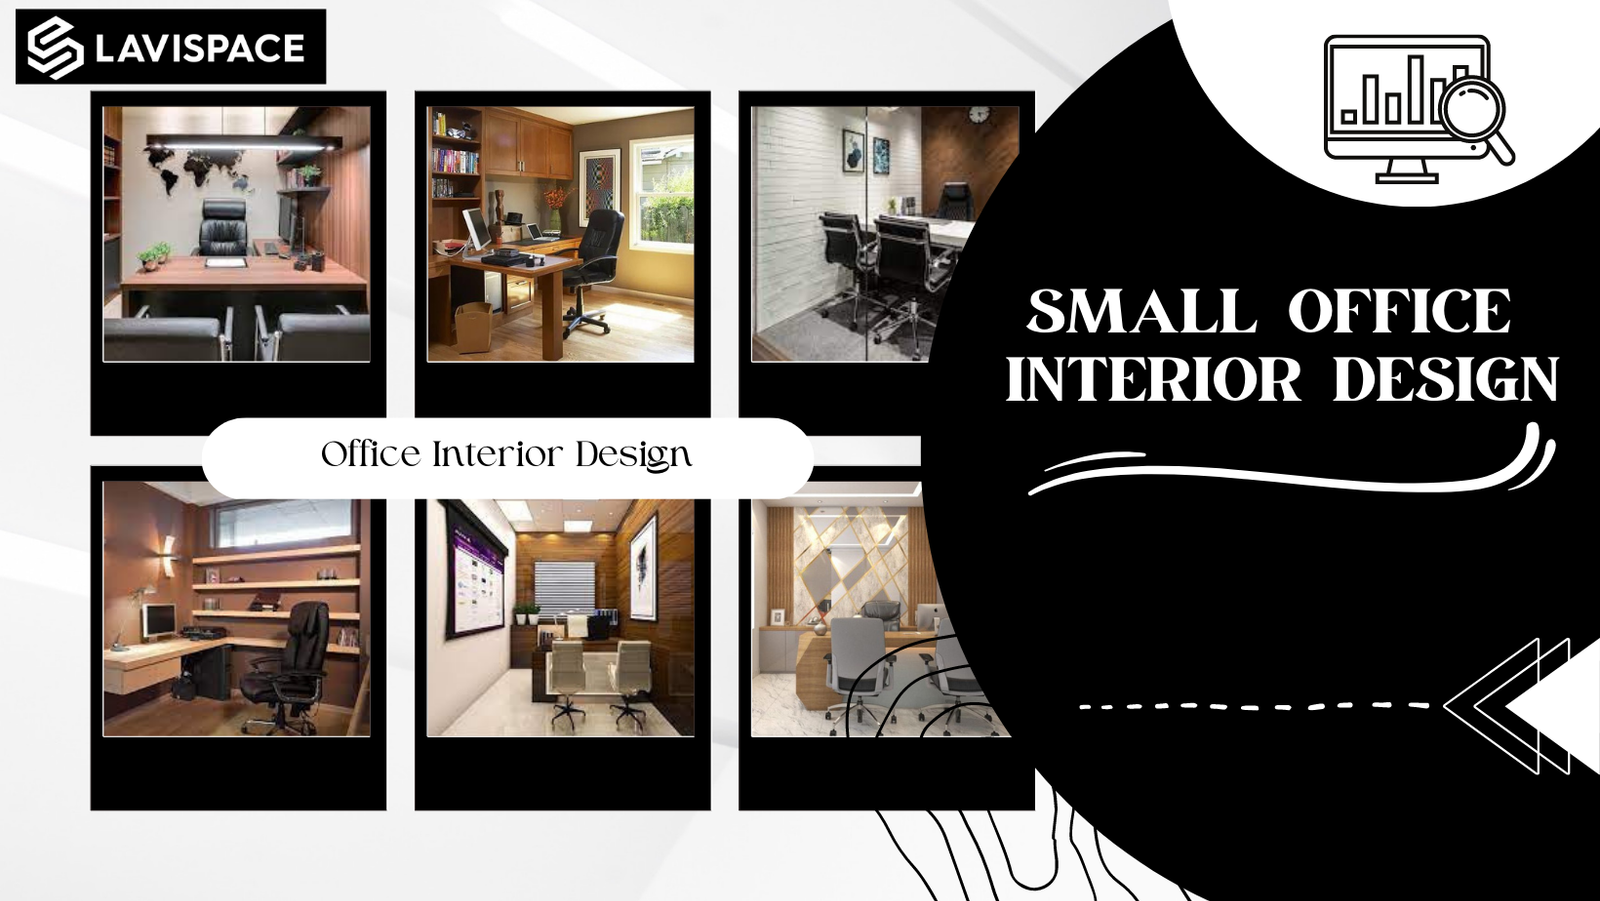 You are currently viewing Small Office Interior Design | Lavispace